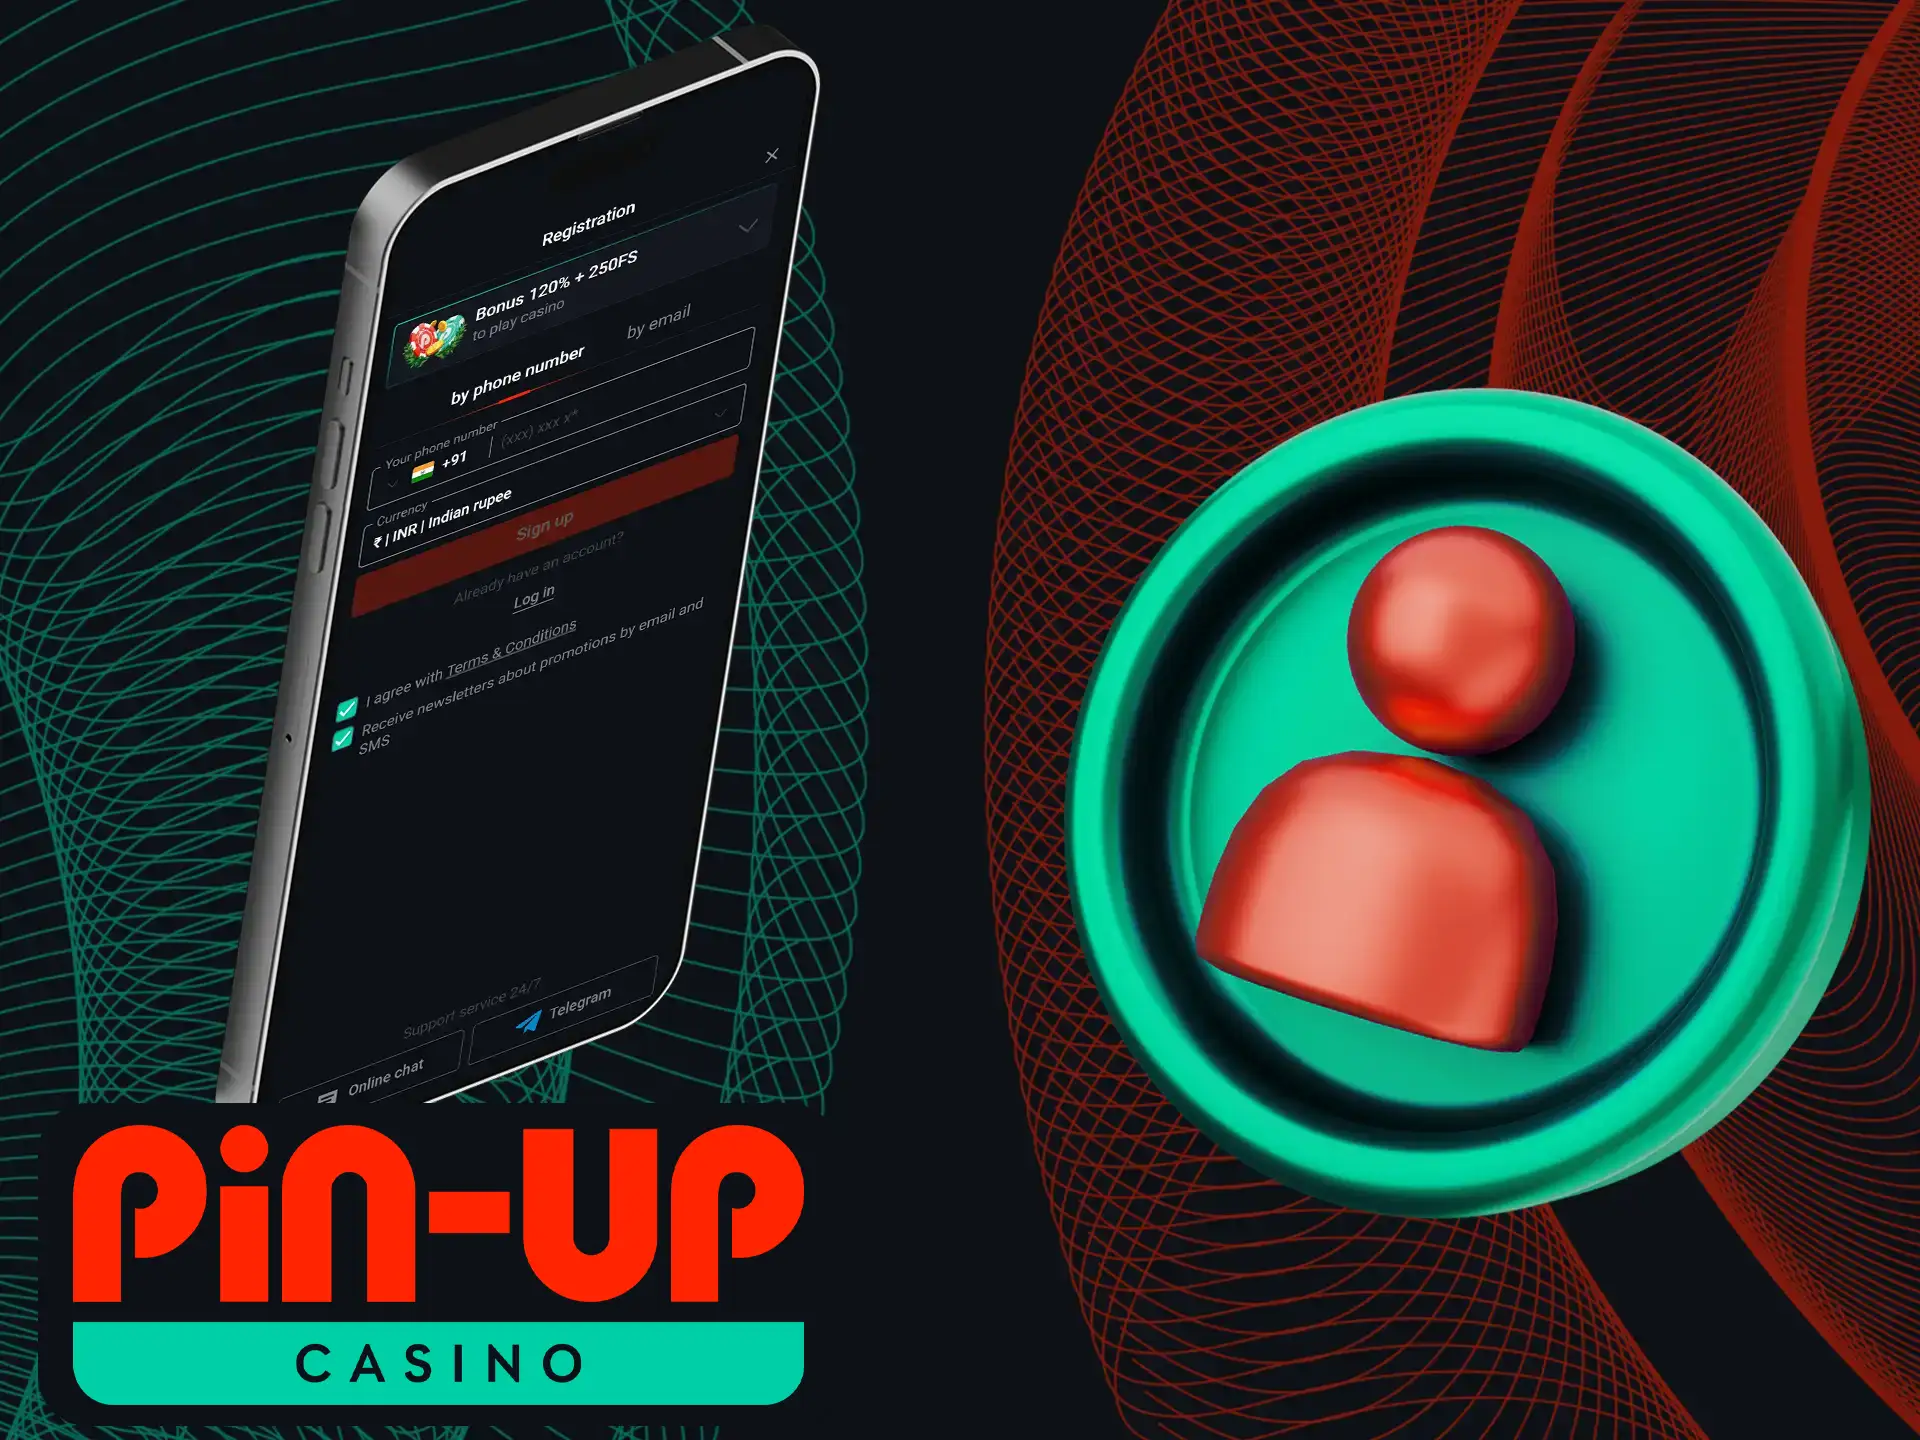 You must register before you can start playing games at Pin-Up Casino.